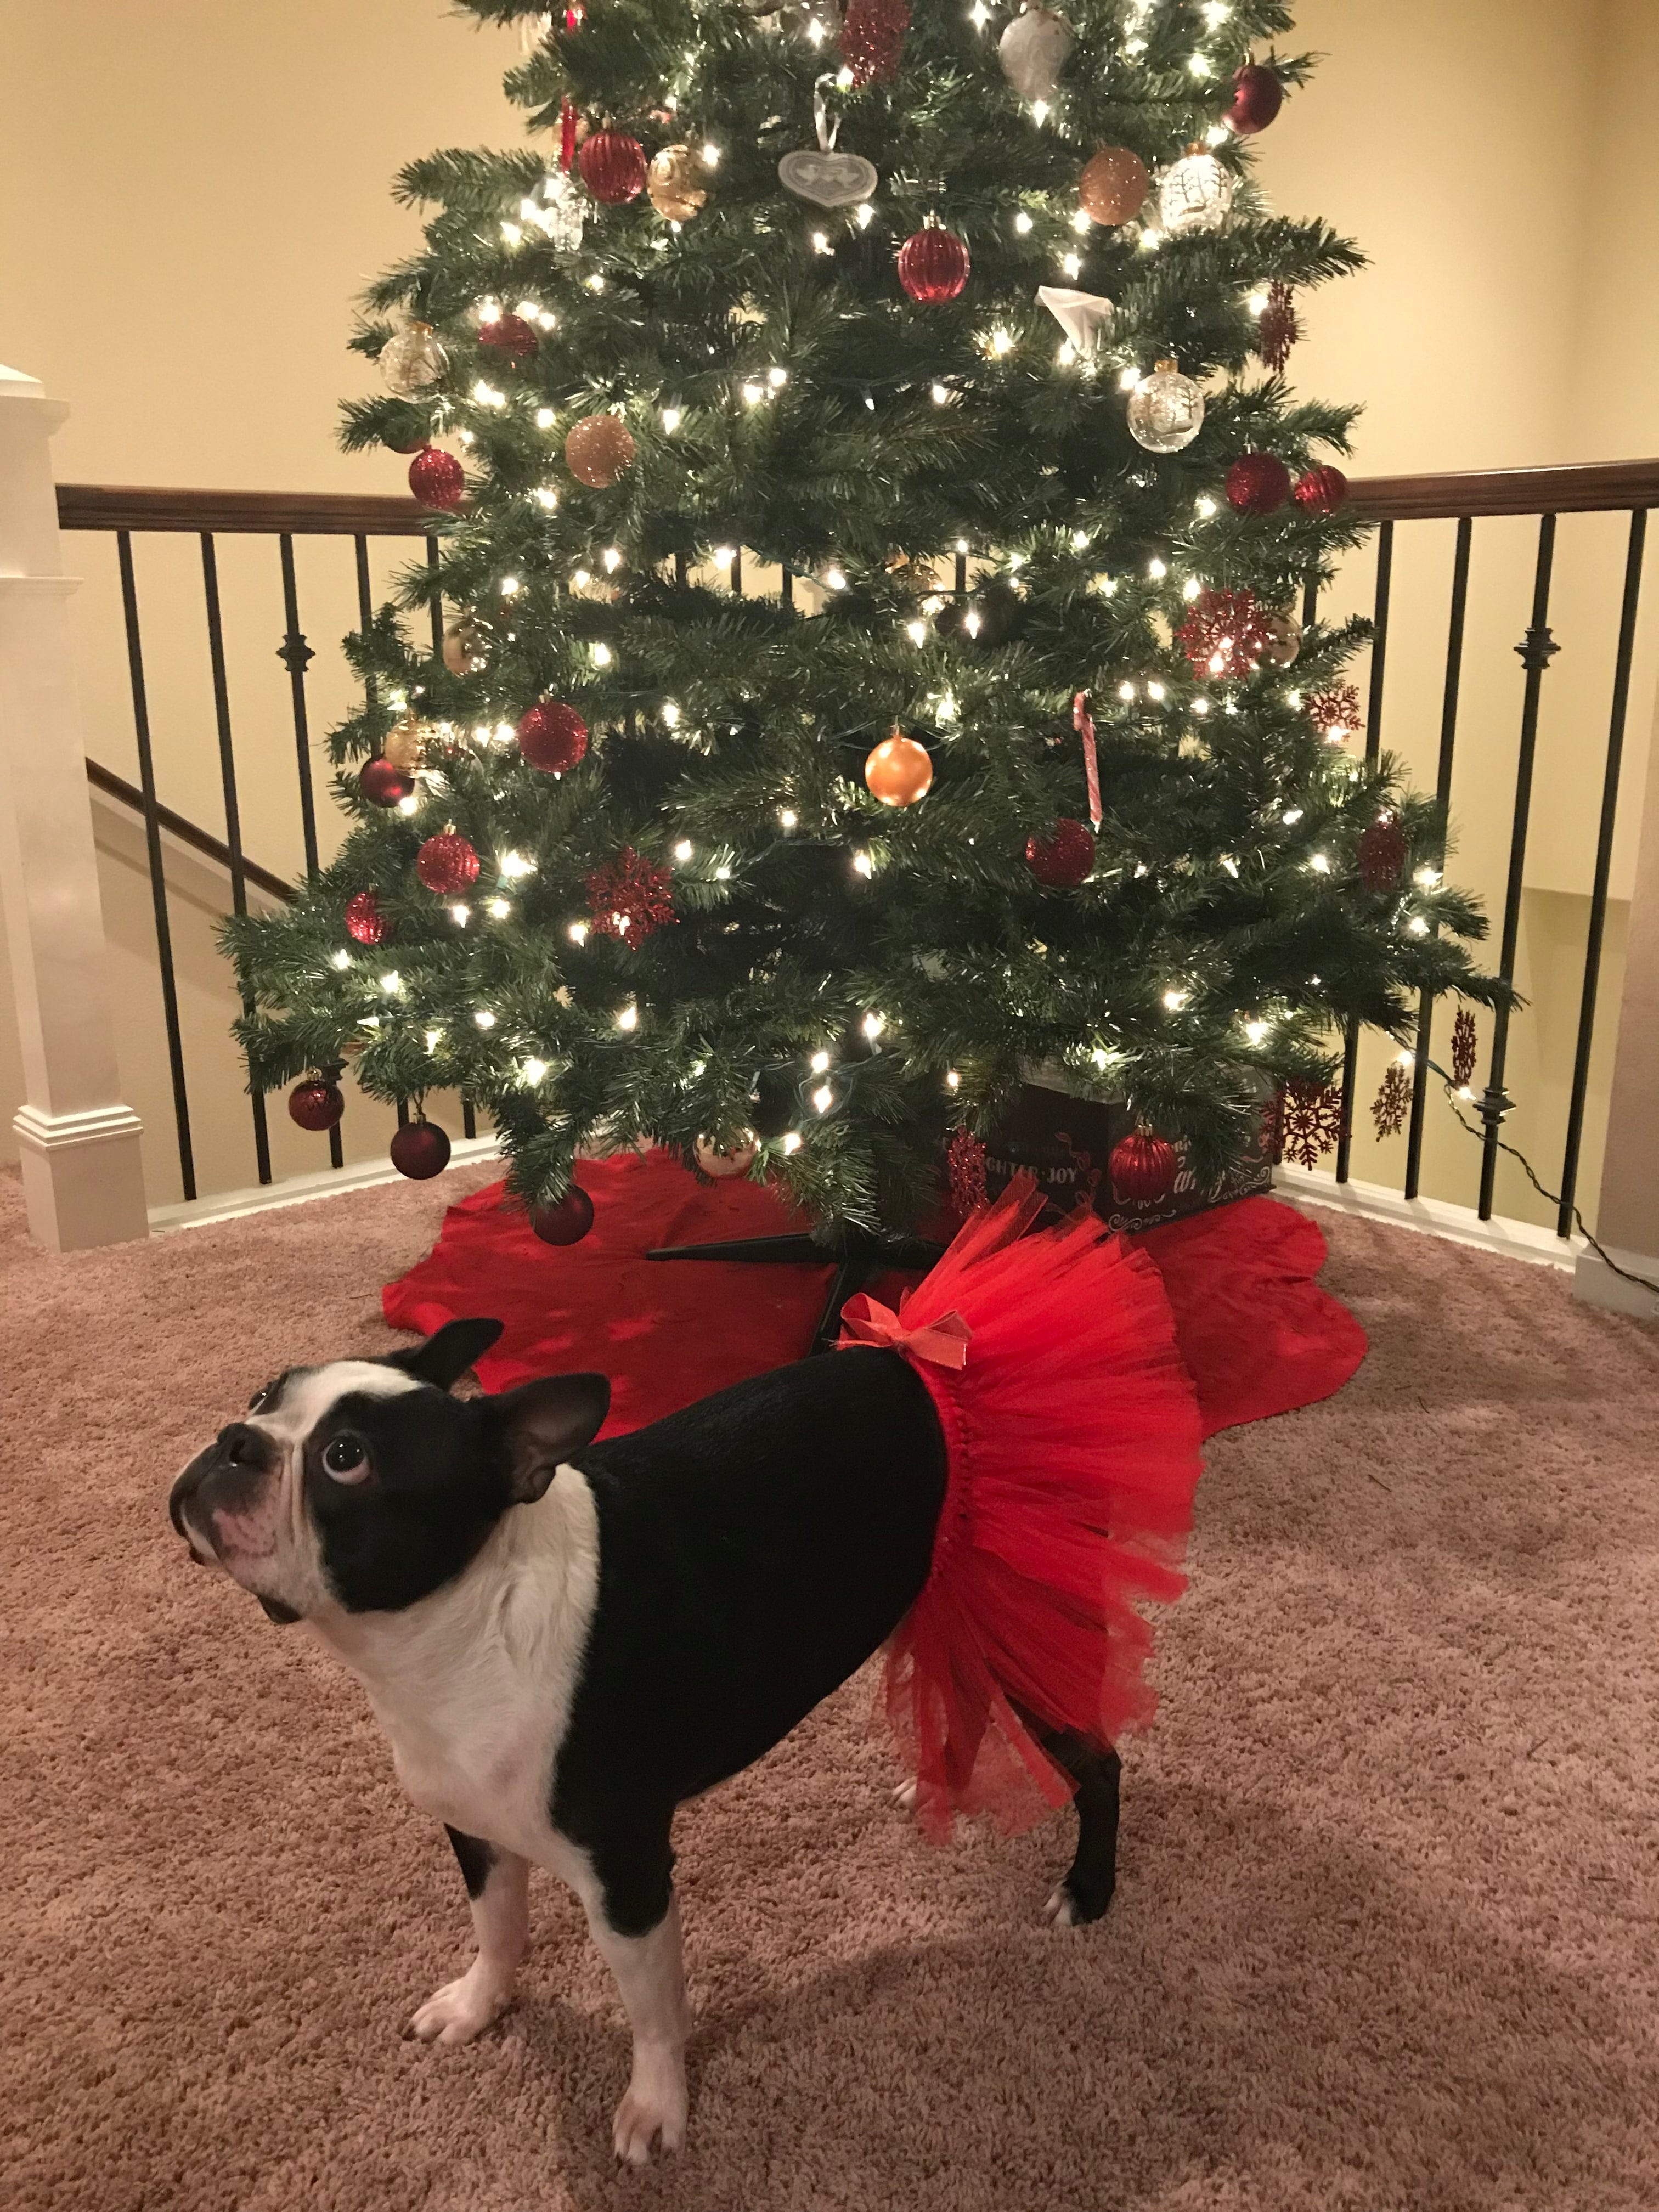 christmas red tutu with bow for pets and dogs by tutu joli, red dog tutu, red tootoo, red valentines day tutu for dogs, red valentines day tutu for cats, red valentines day tutu for pets, red valentines day tutu for chickens, xmas tutu for dogs, red x-mass dog tutu, xmas tutu for cats in red color, small pet tutu red, large pet tutu in red, active dog tutu